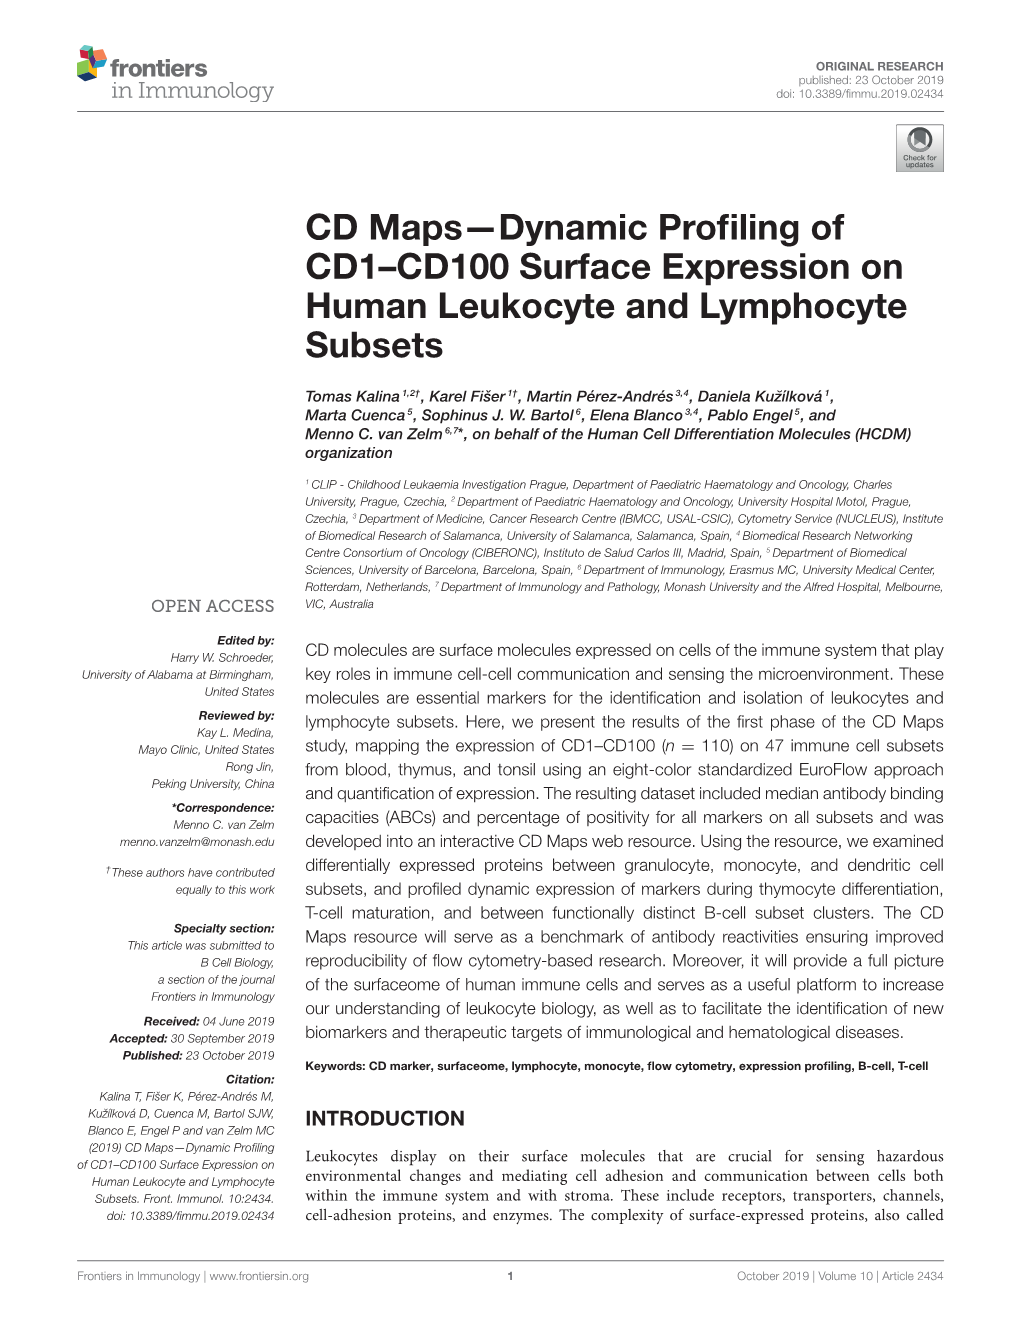 CD Maps—Dynamic Profiling of CD1–CD100 Surface Expression on Human Leukocyte and Lymphocyte Subsets